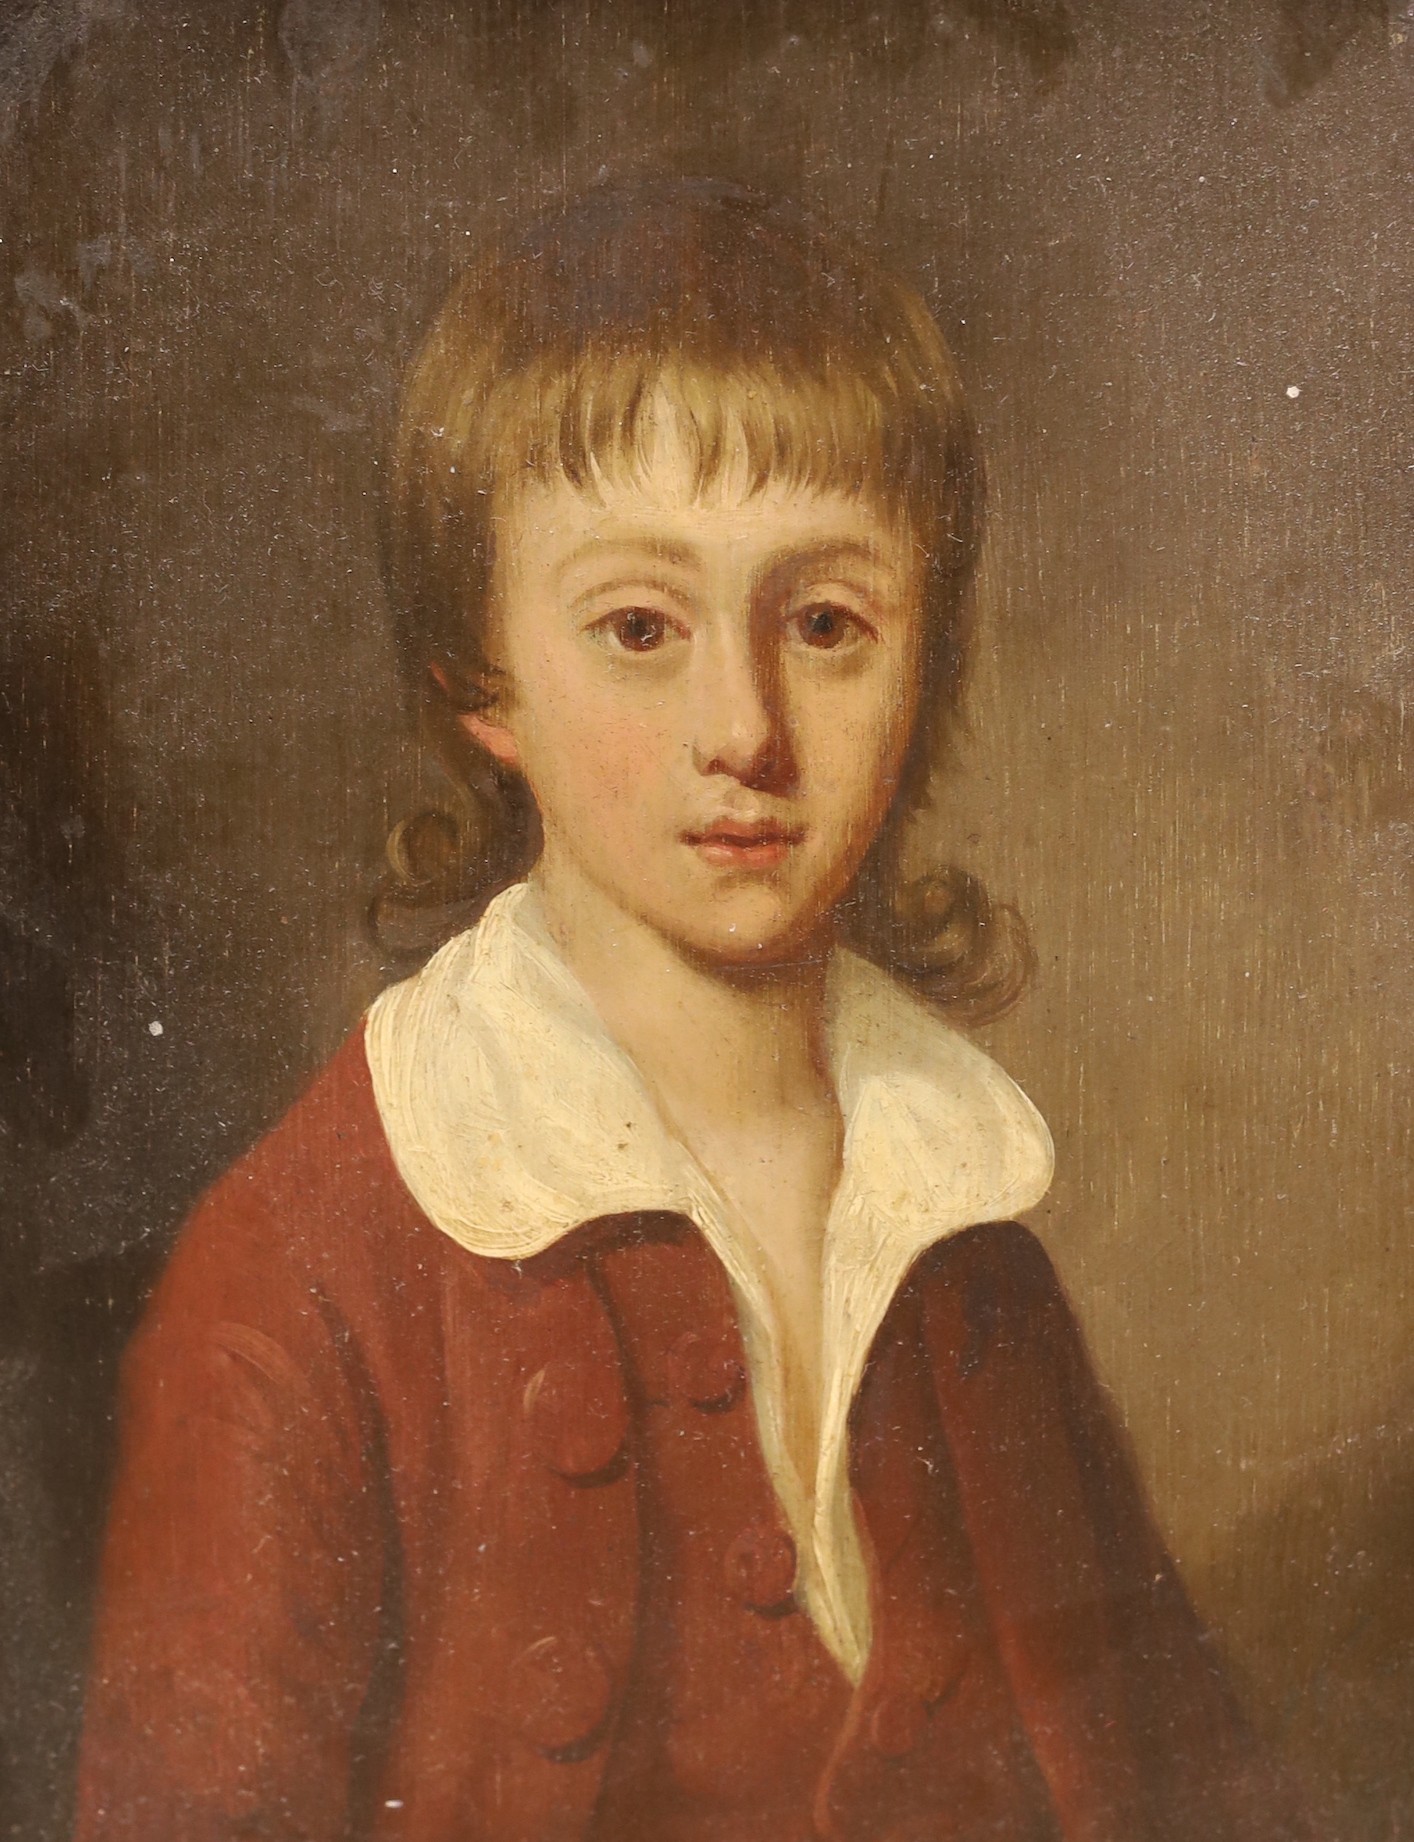 English School c.1800, oil on wooden panel, Portrait of a youth wearing a brown coat, 25 x 19cm